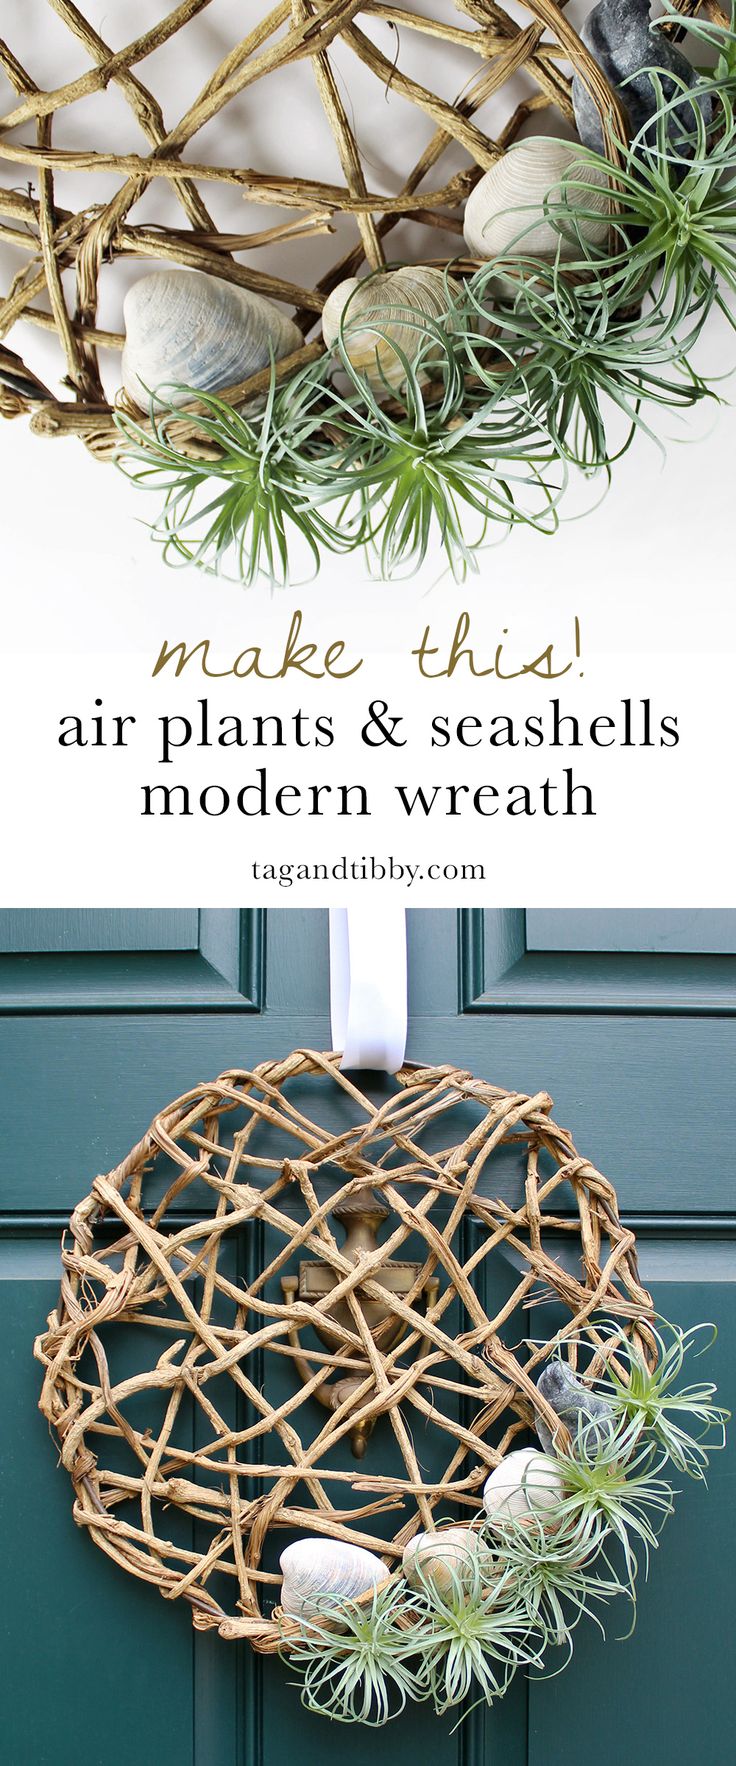 Make This Air Plant Wreath with Seashells